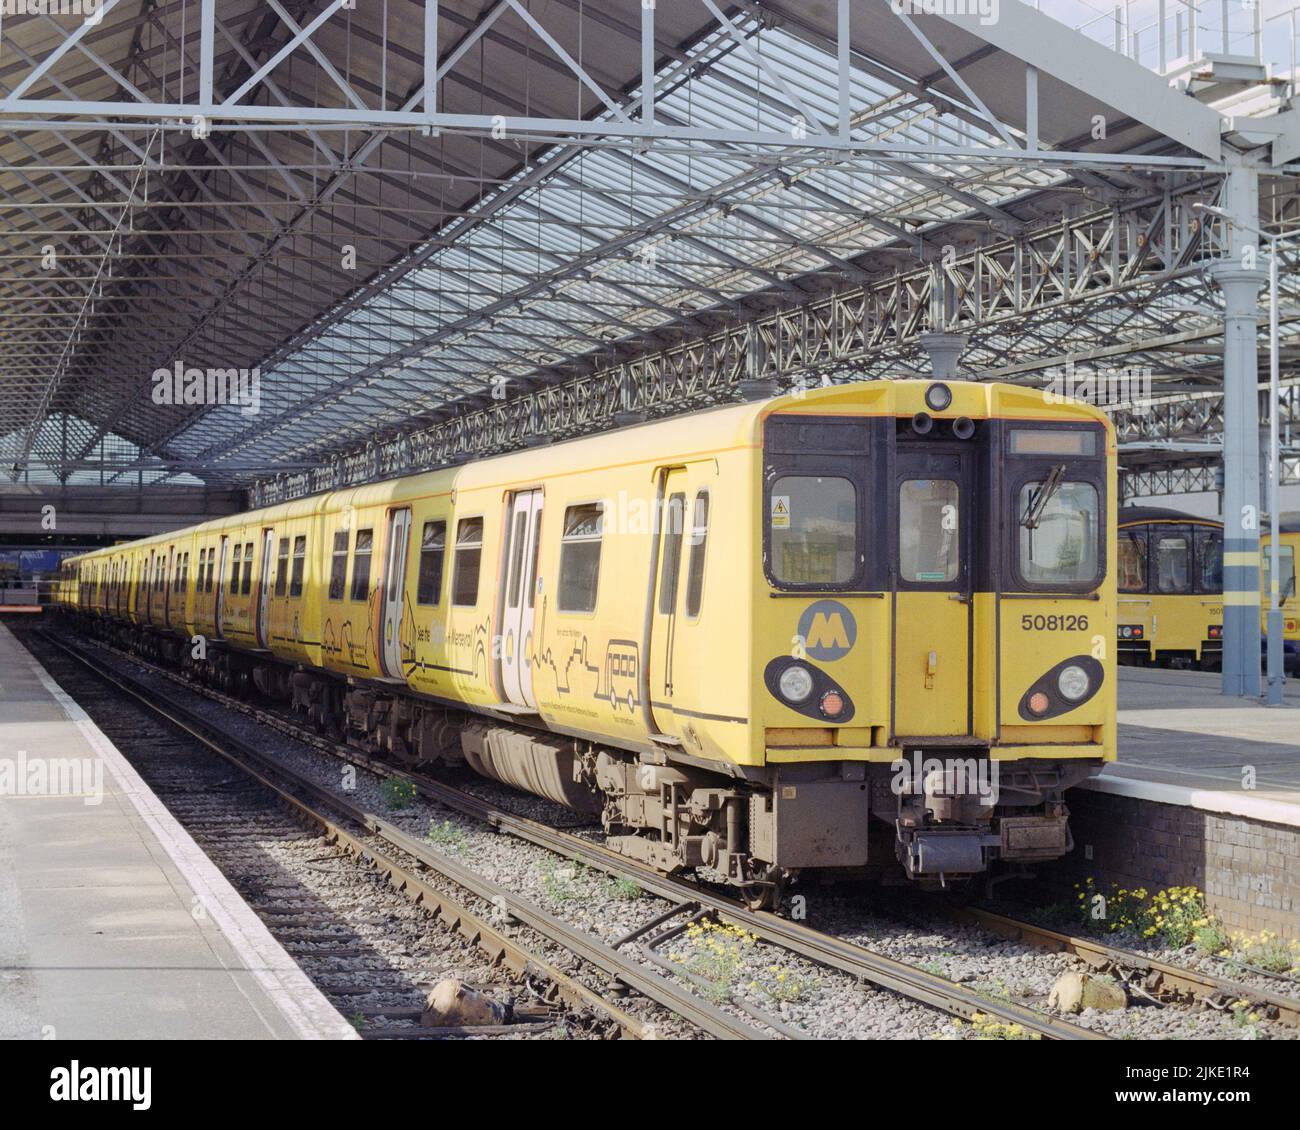 Southport, UK - 24 April 2022: An electric passenger train (Class 508) operated by Merseyrail at Southport station. Stock Photo